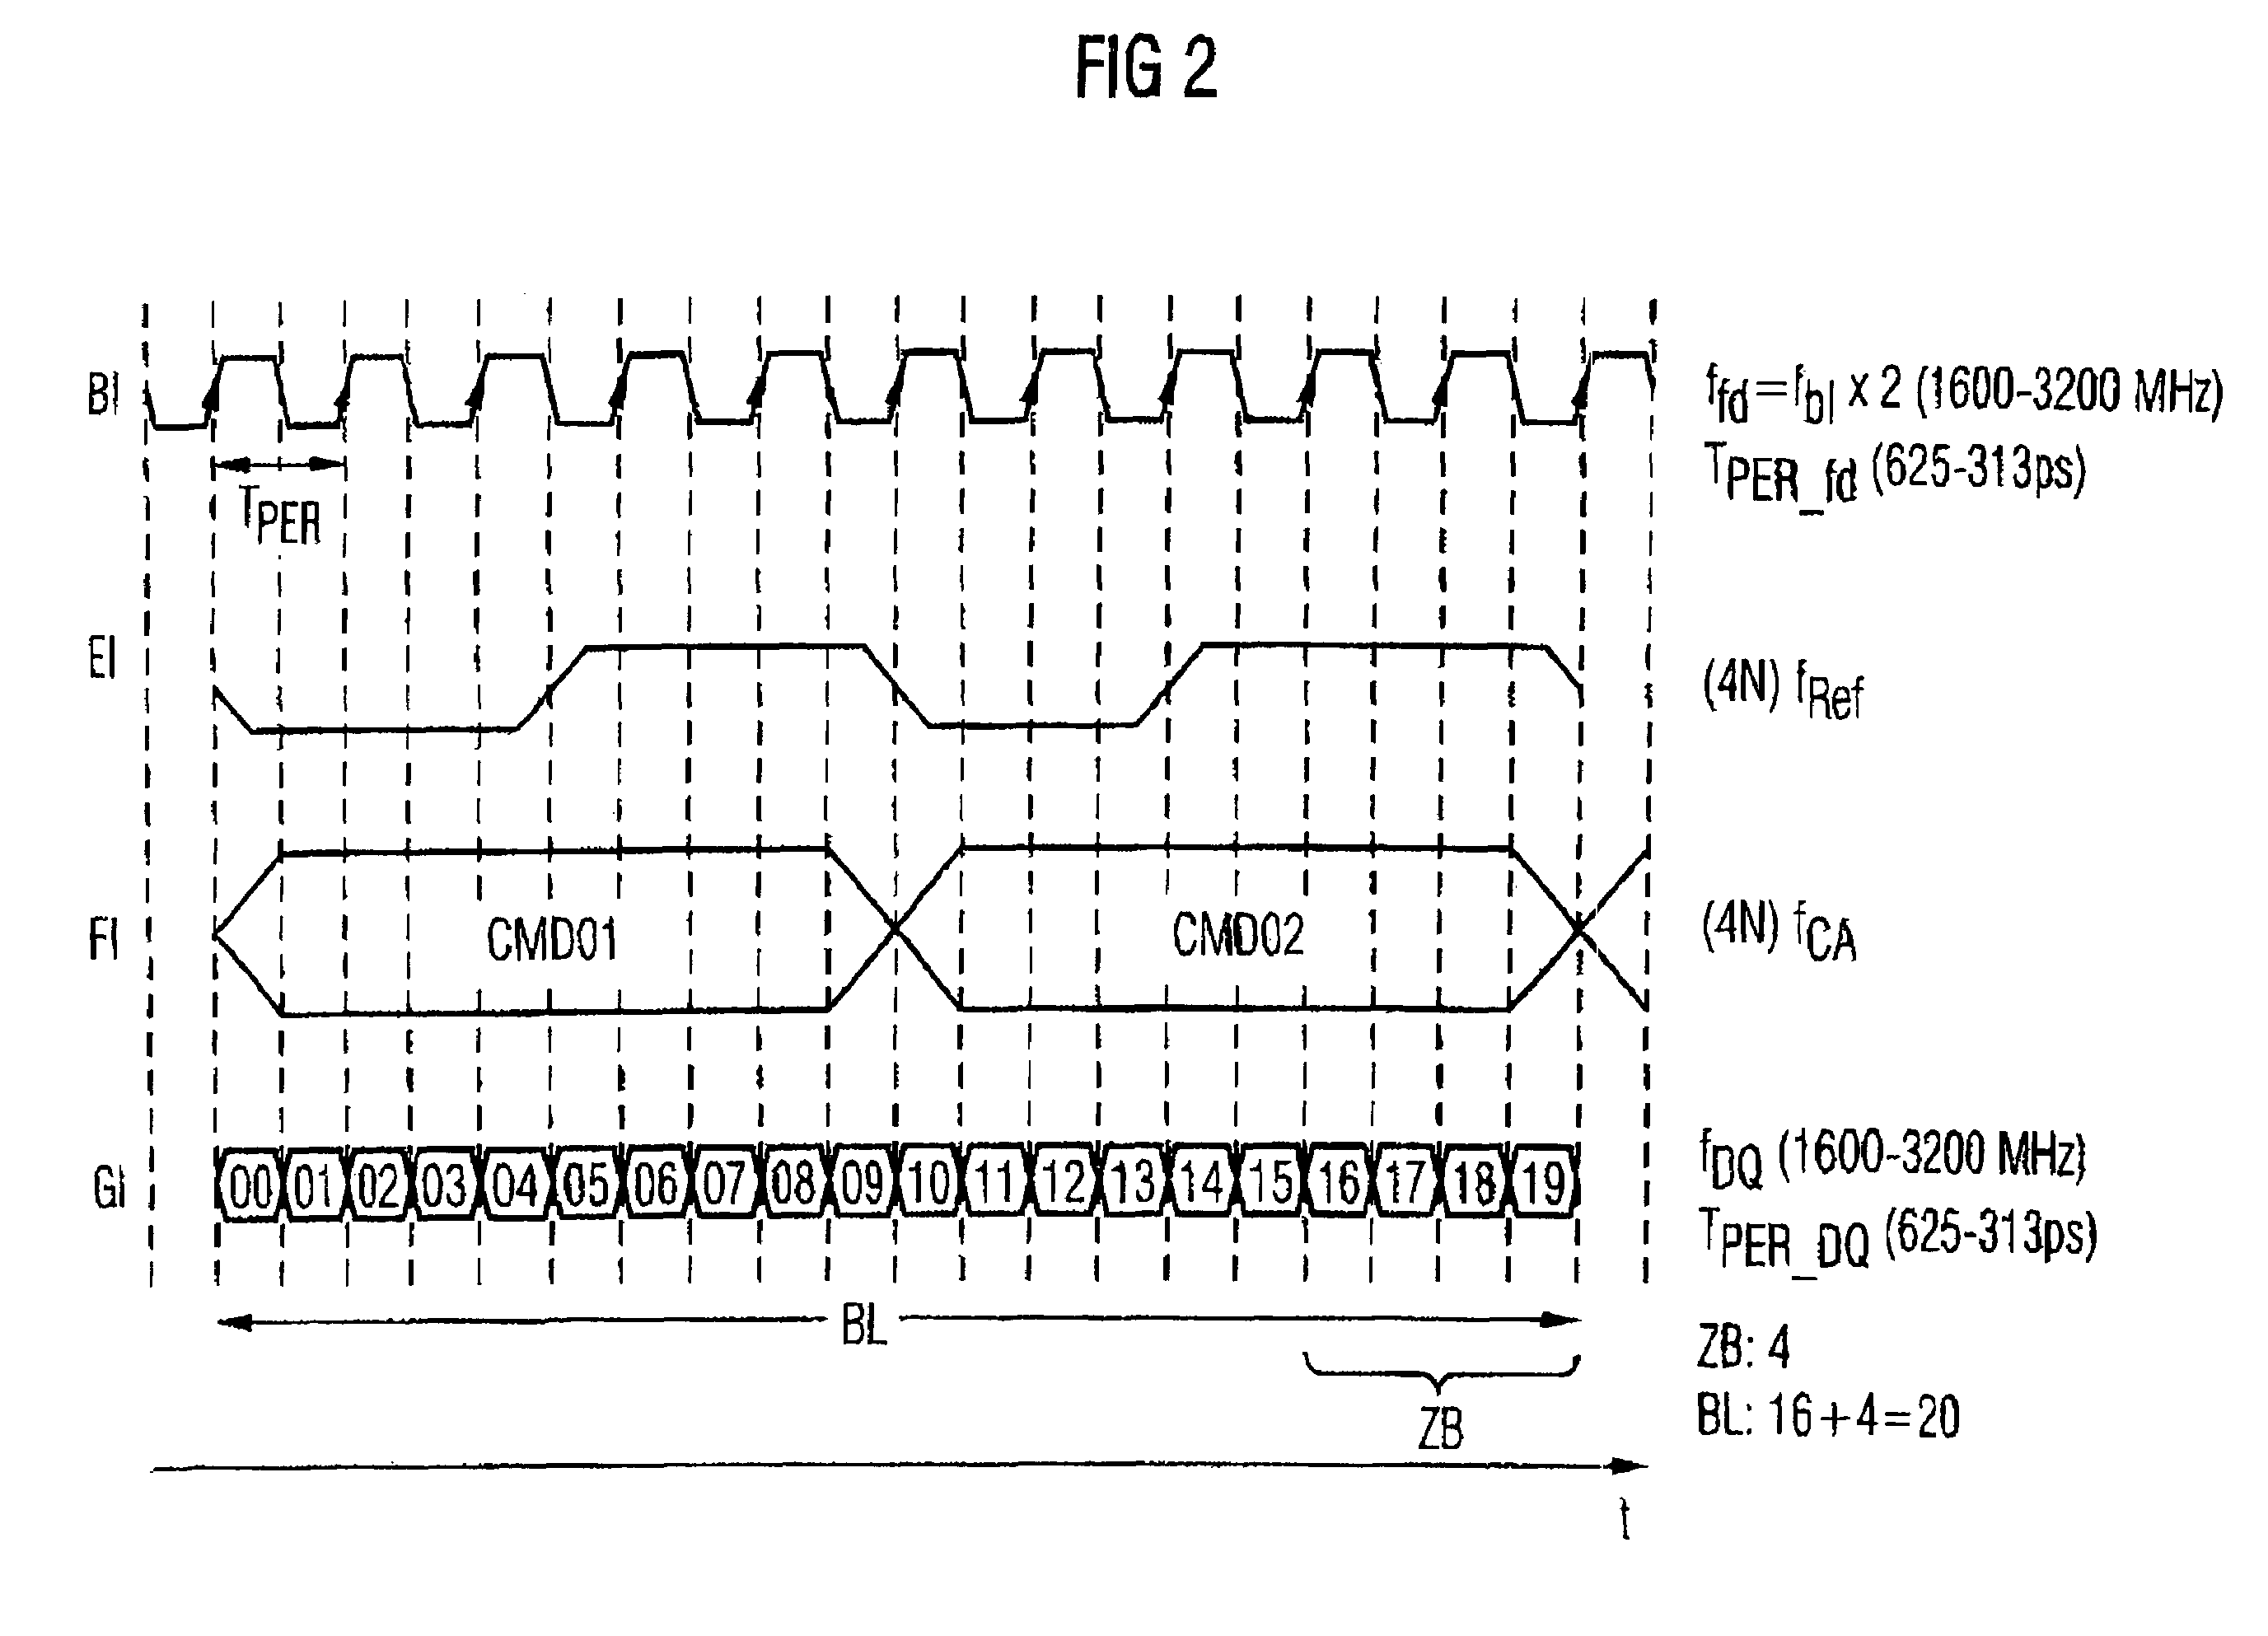 Semiconductor memory system and method for the transfer of write and read data signals in a semiconductor memory system